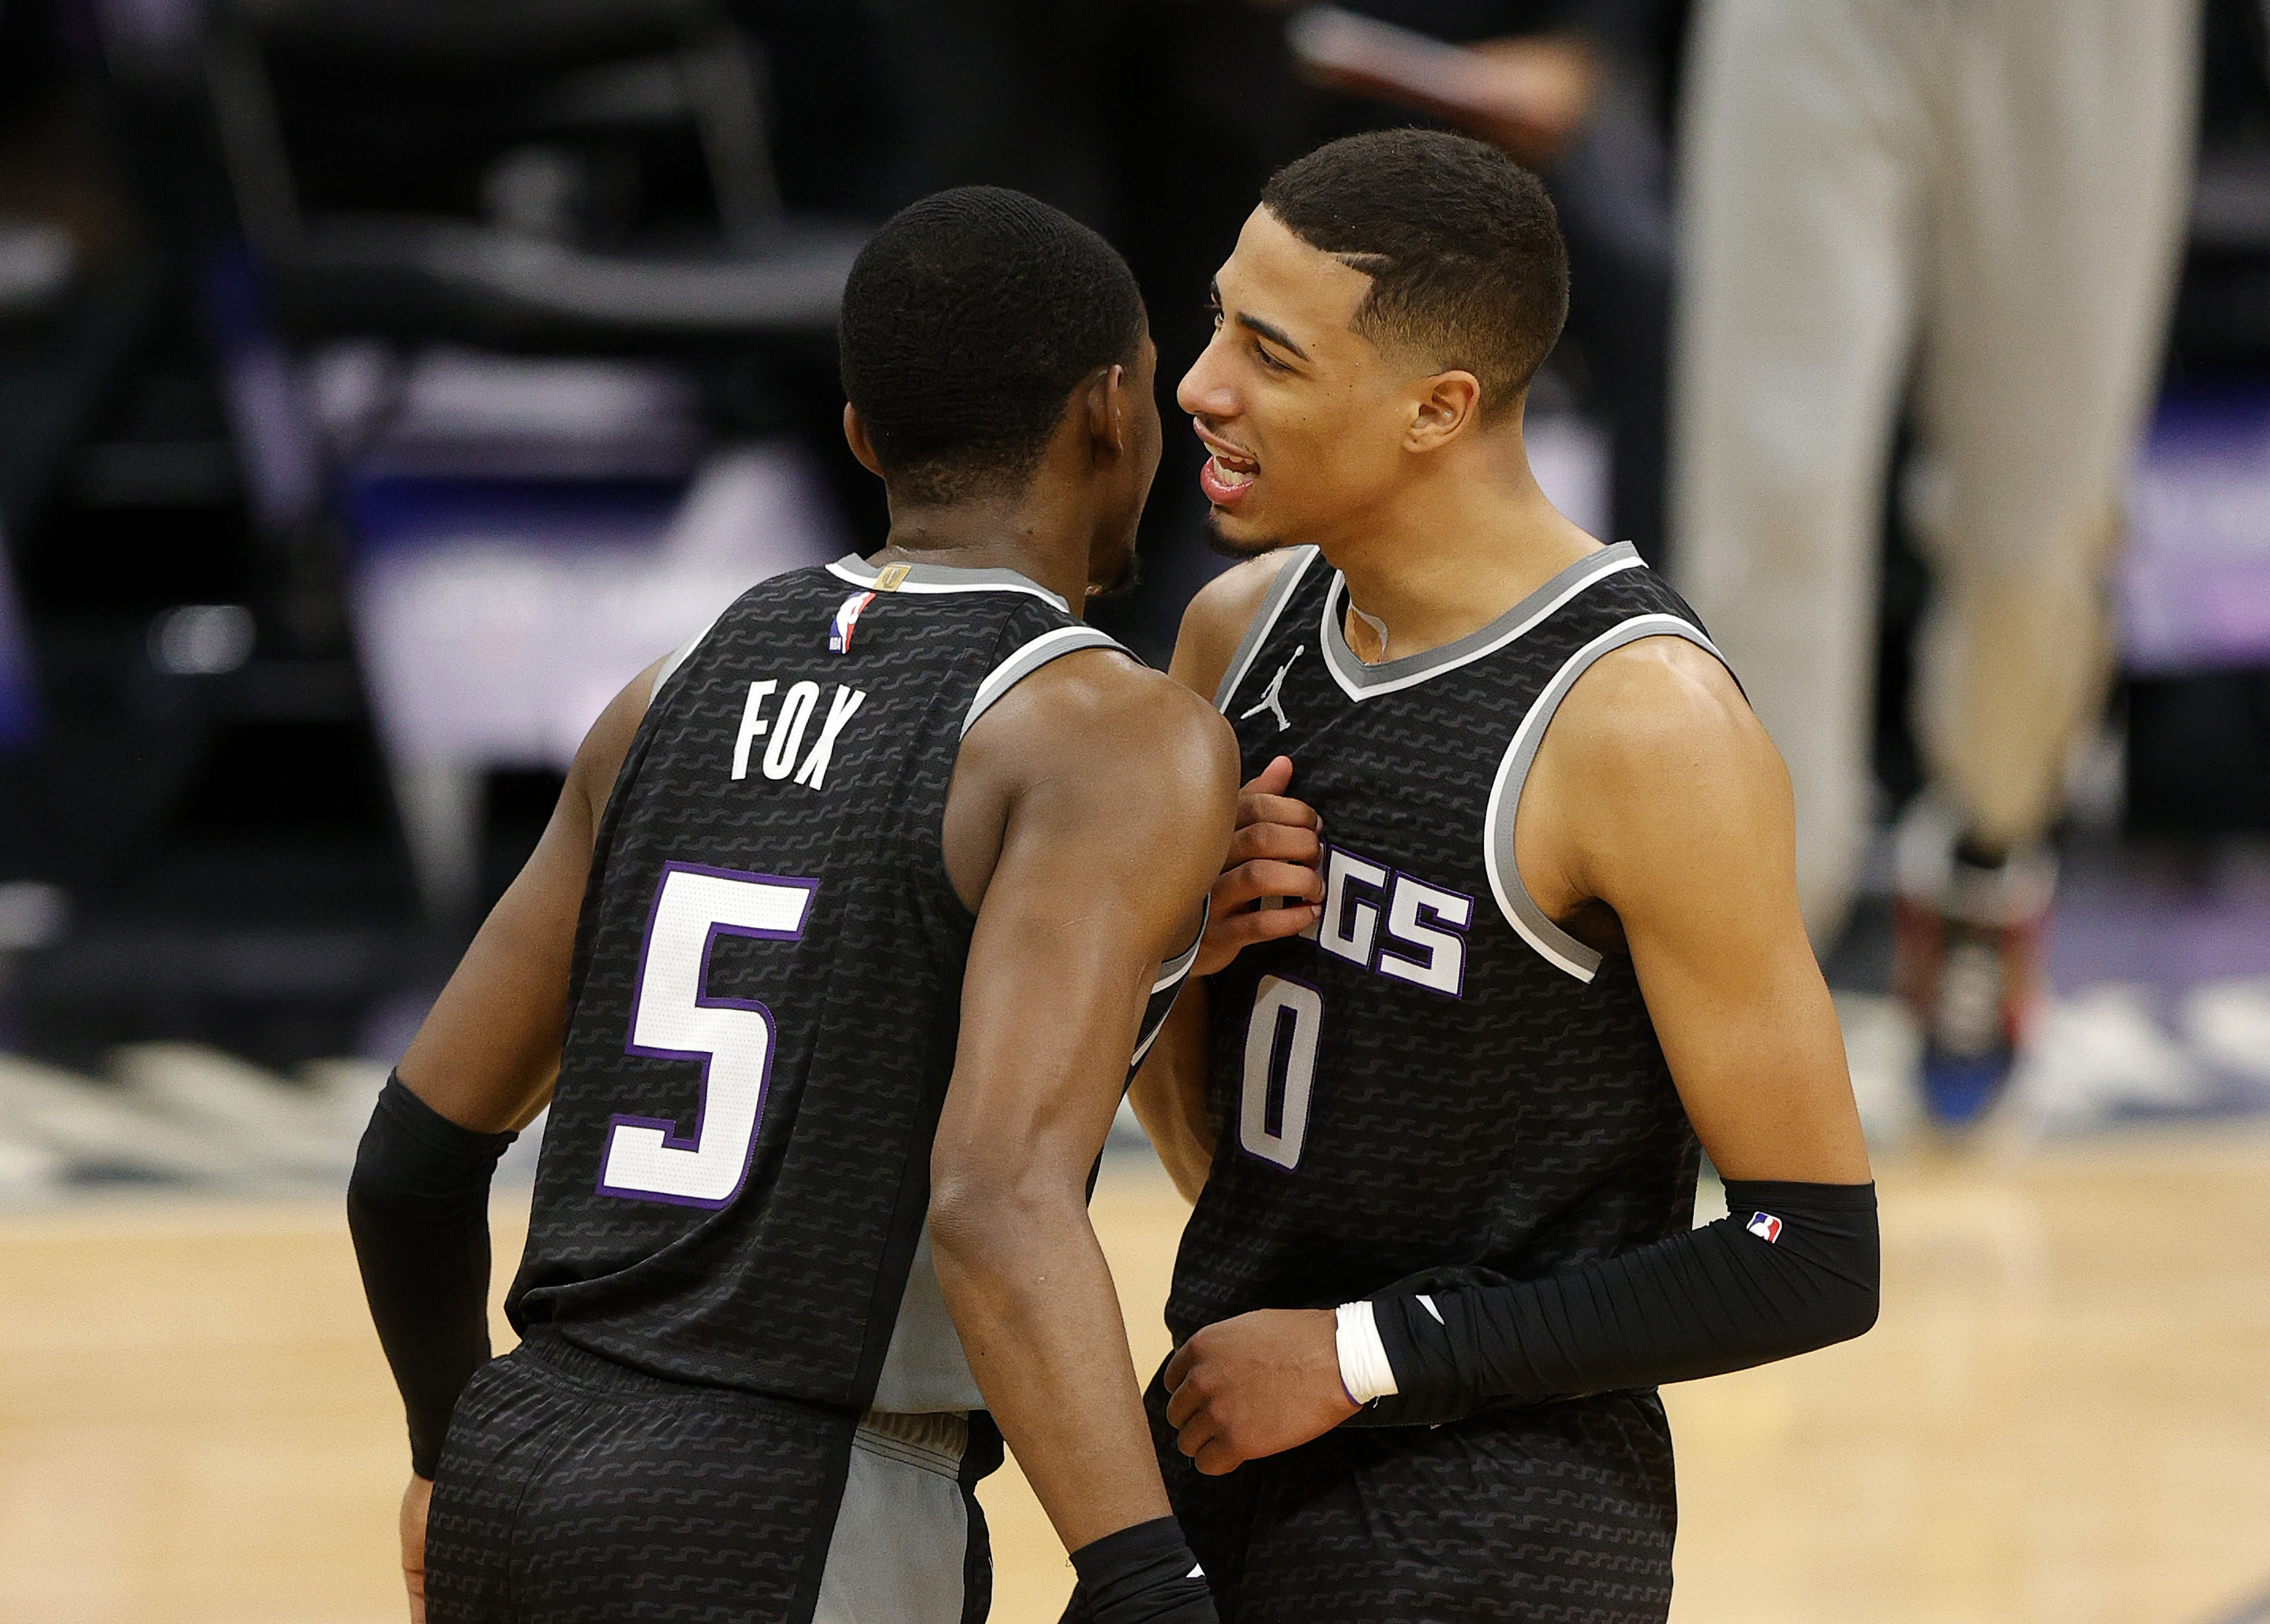 With a young, talented backcourt led by De'Aaron Fox (left) and Tyrese Haliburton, the Kings are looking to make the leap this year.